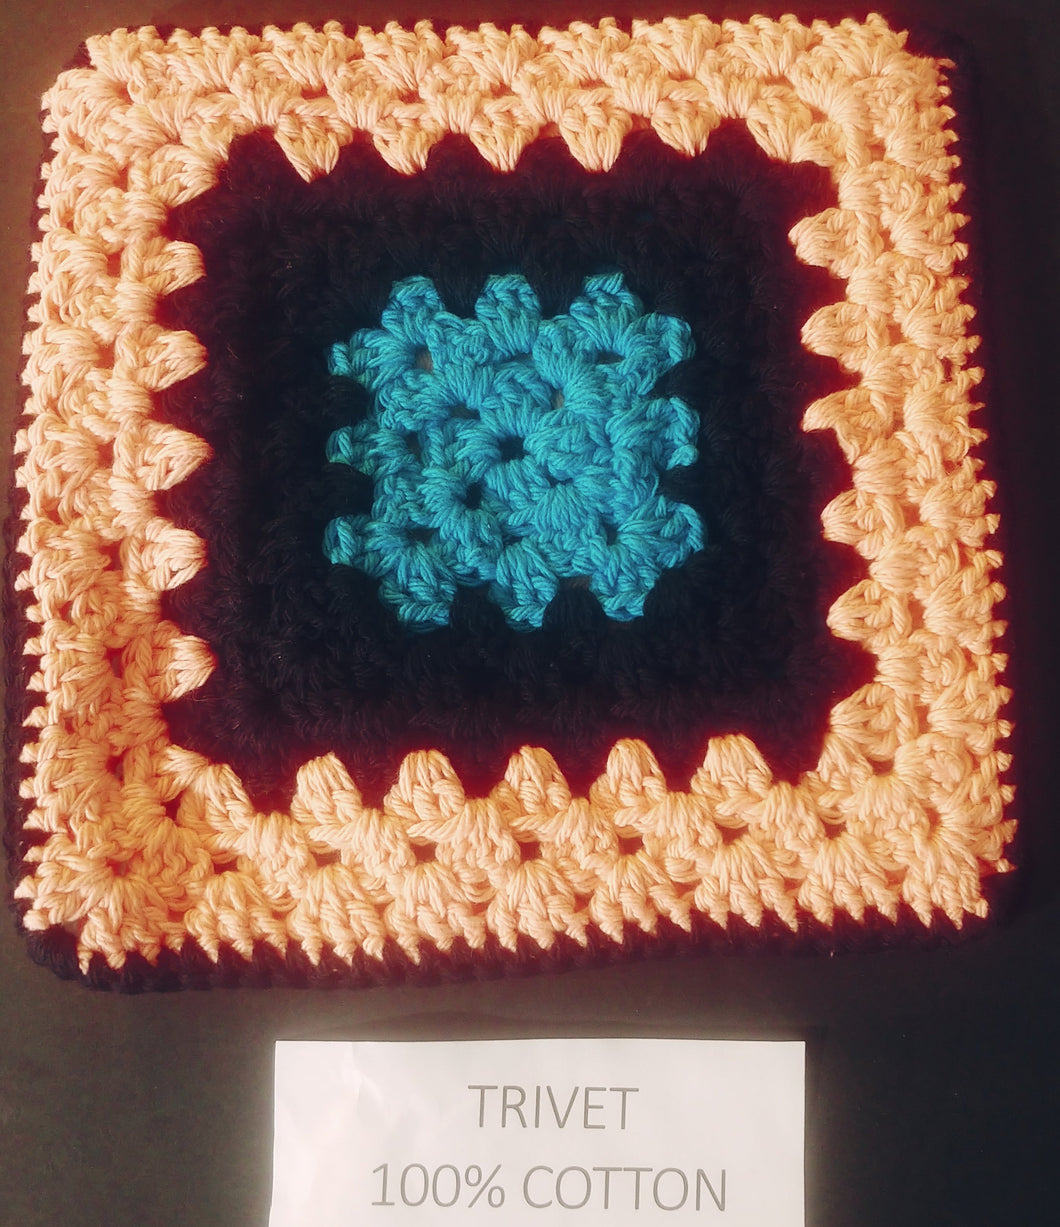 100% Cotton Dual Sided Trivet, VARIGATED COLORS. SOLD IN SETS OF 2,